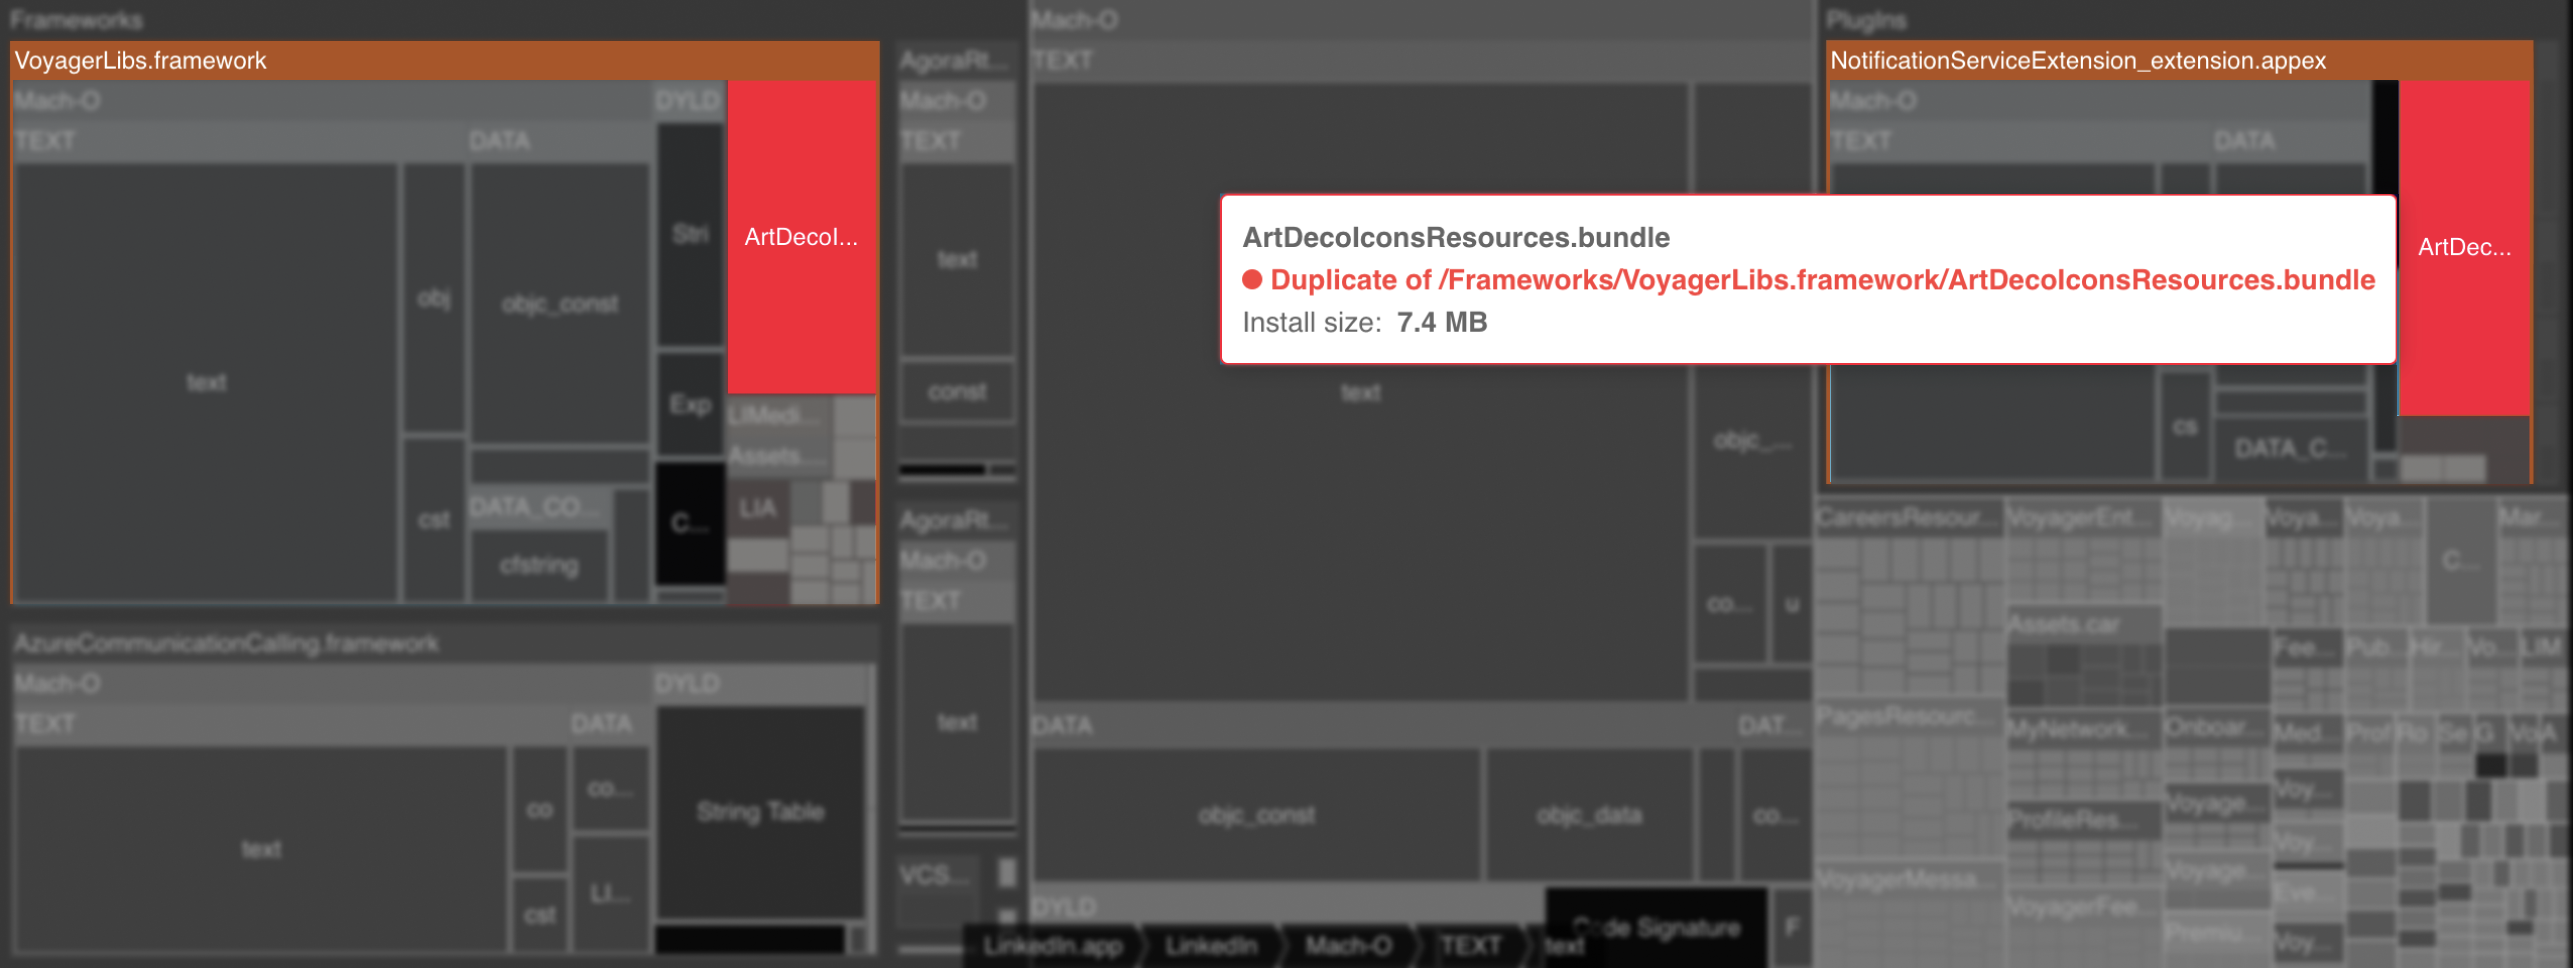 Treemap showing a duplicated file across a framework and a plugin